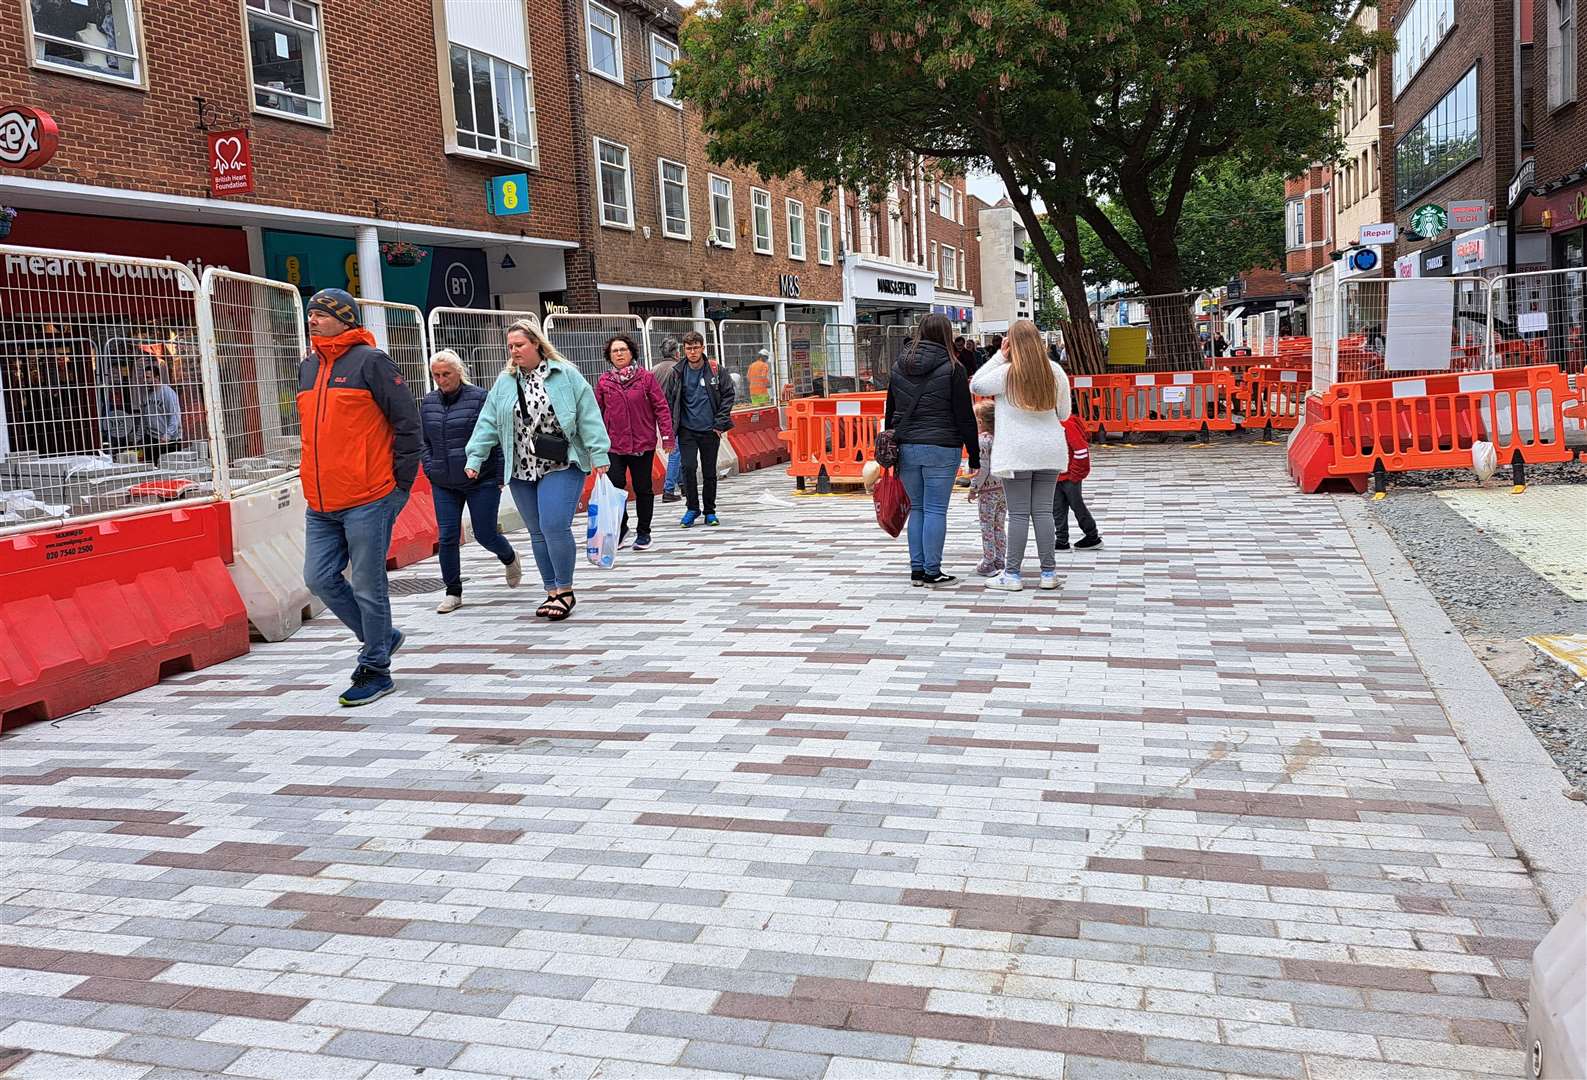 The design of colourful paving stones also came in for criticism last month